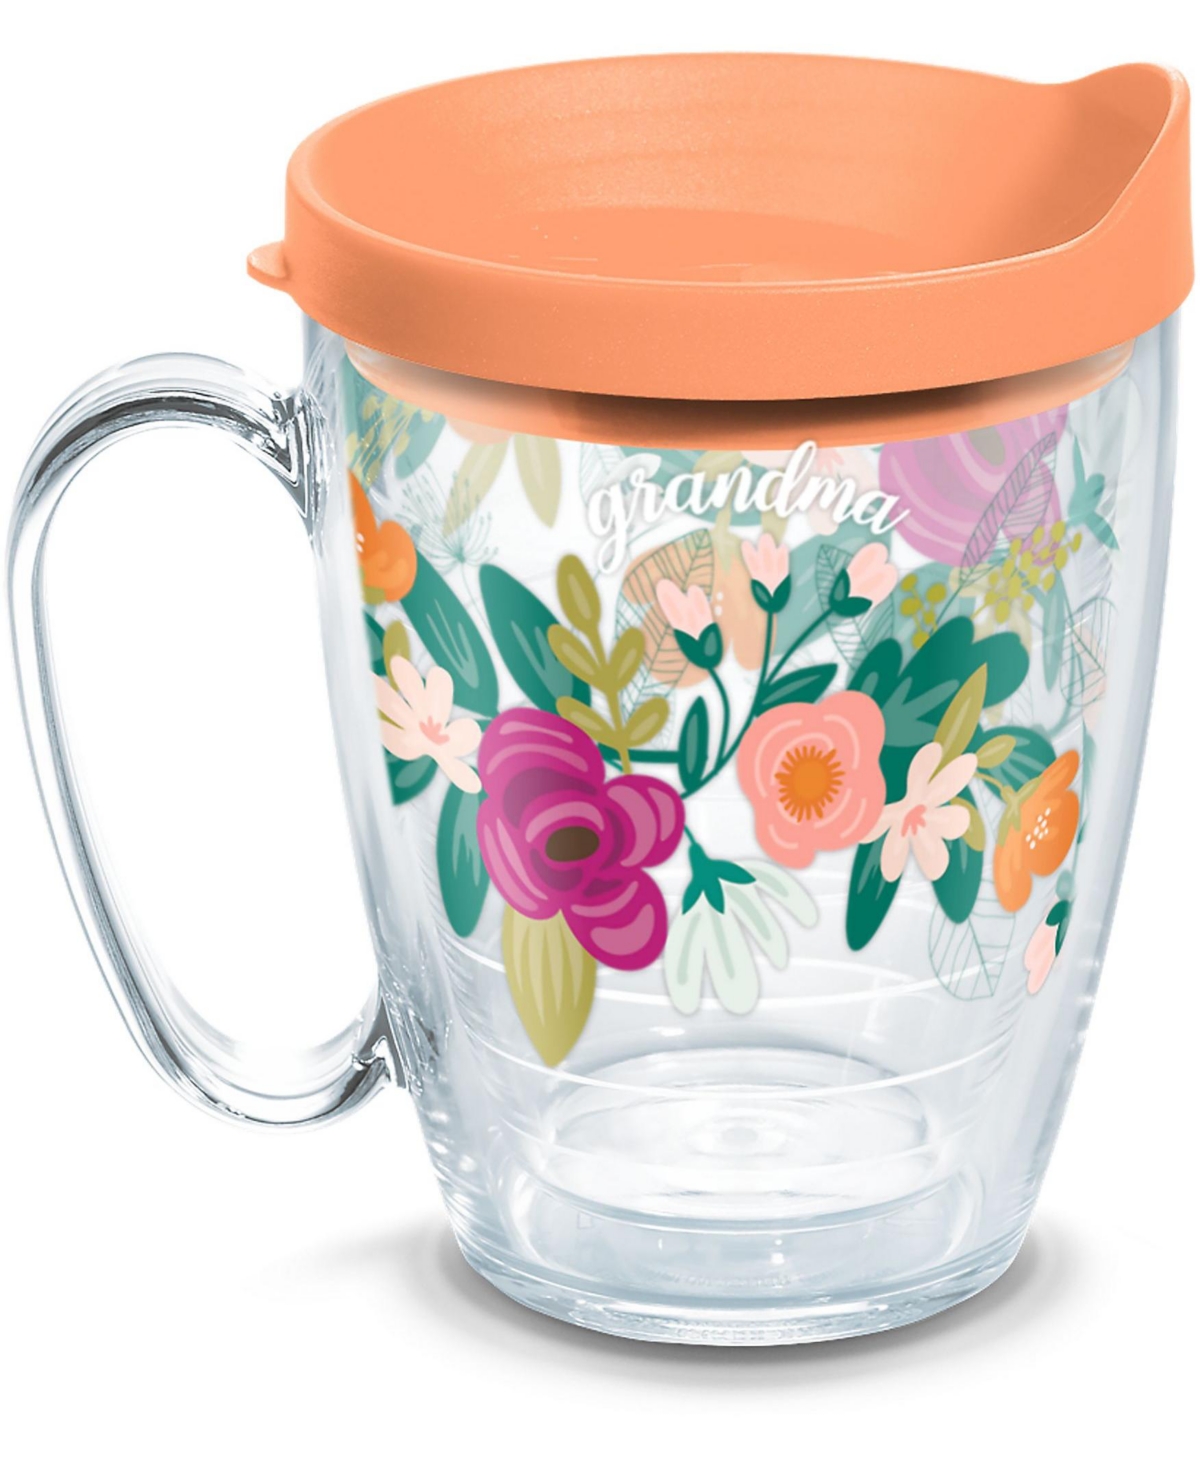 Tervis Tumbler Tervis Grandma Floral Made In Usa Double Walled Insulated Tumbler Travel Cup Keeps Drinks Cold & Hot In Open Miscellaneous